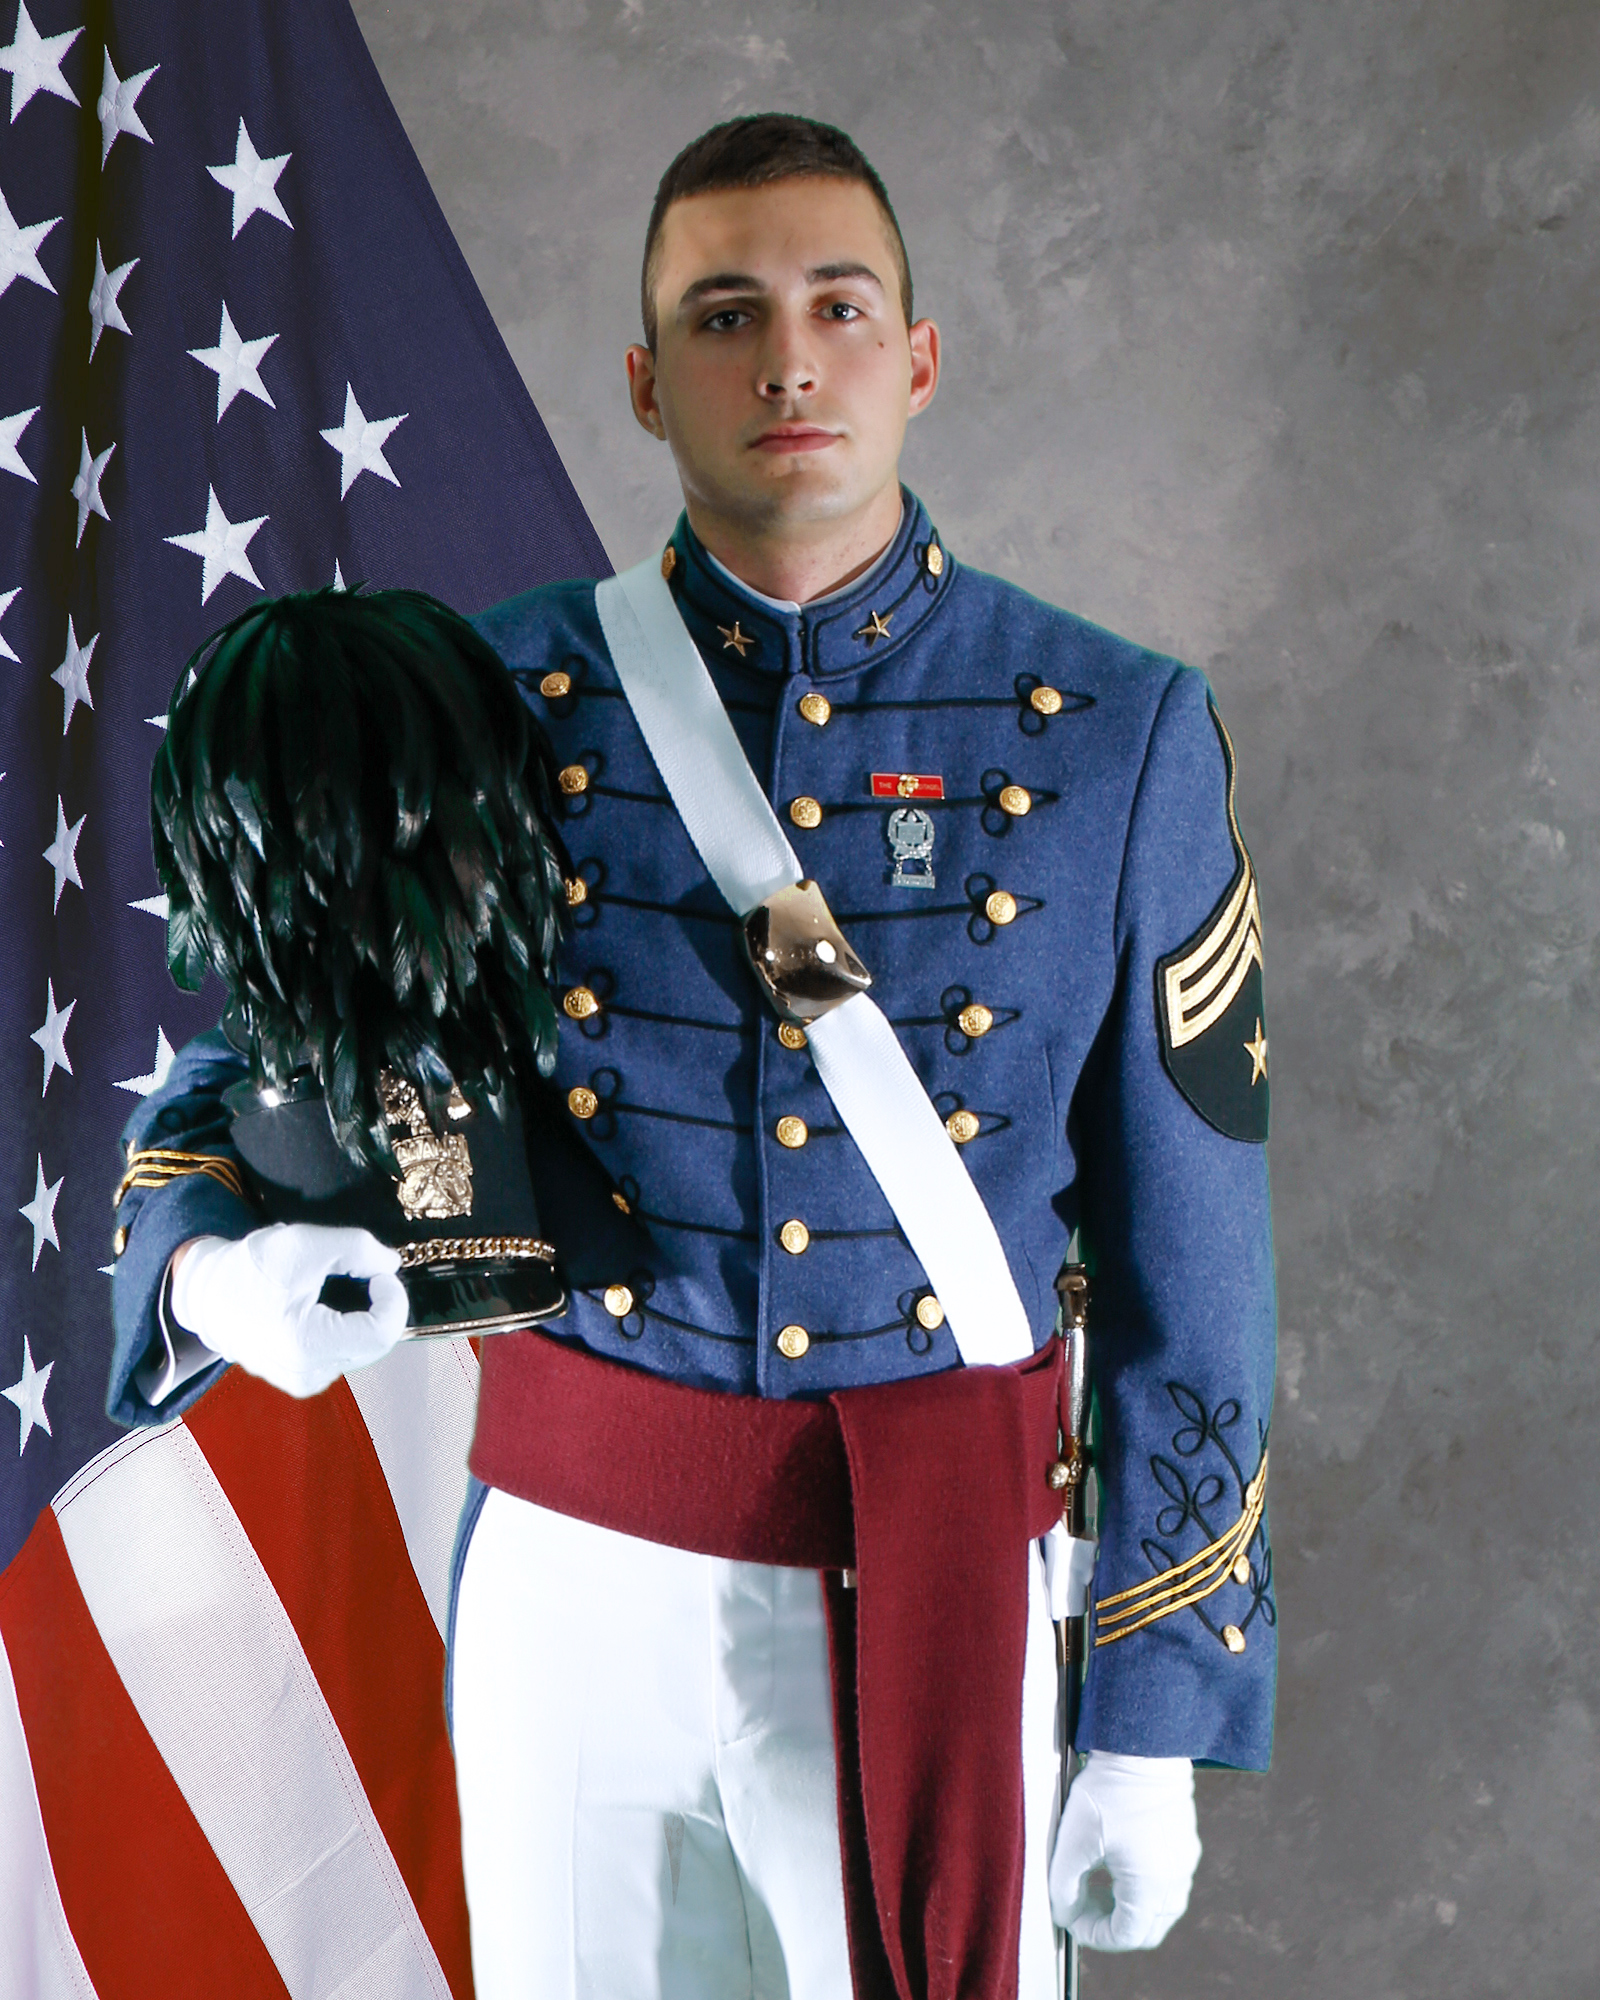 PHOTO: Samuel Poulin, a 2021 graduate of The Citadel, was hit by a bullet on June 27, 2021, in Times Square, New York City.